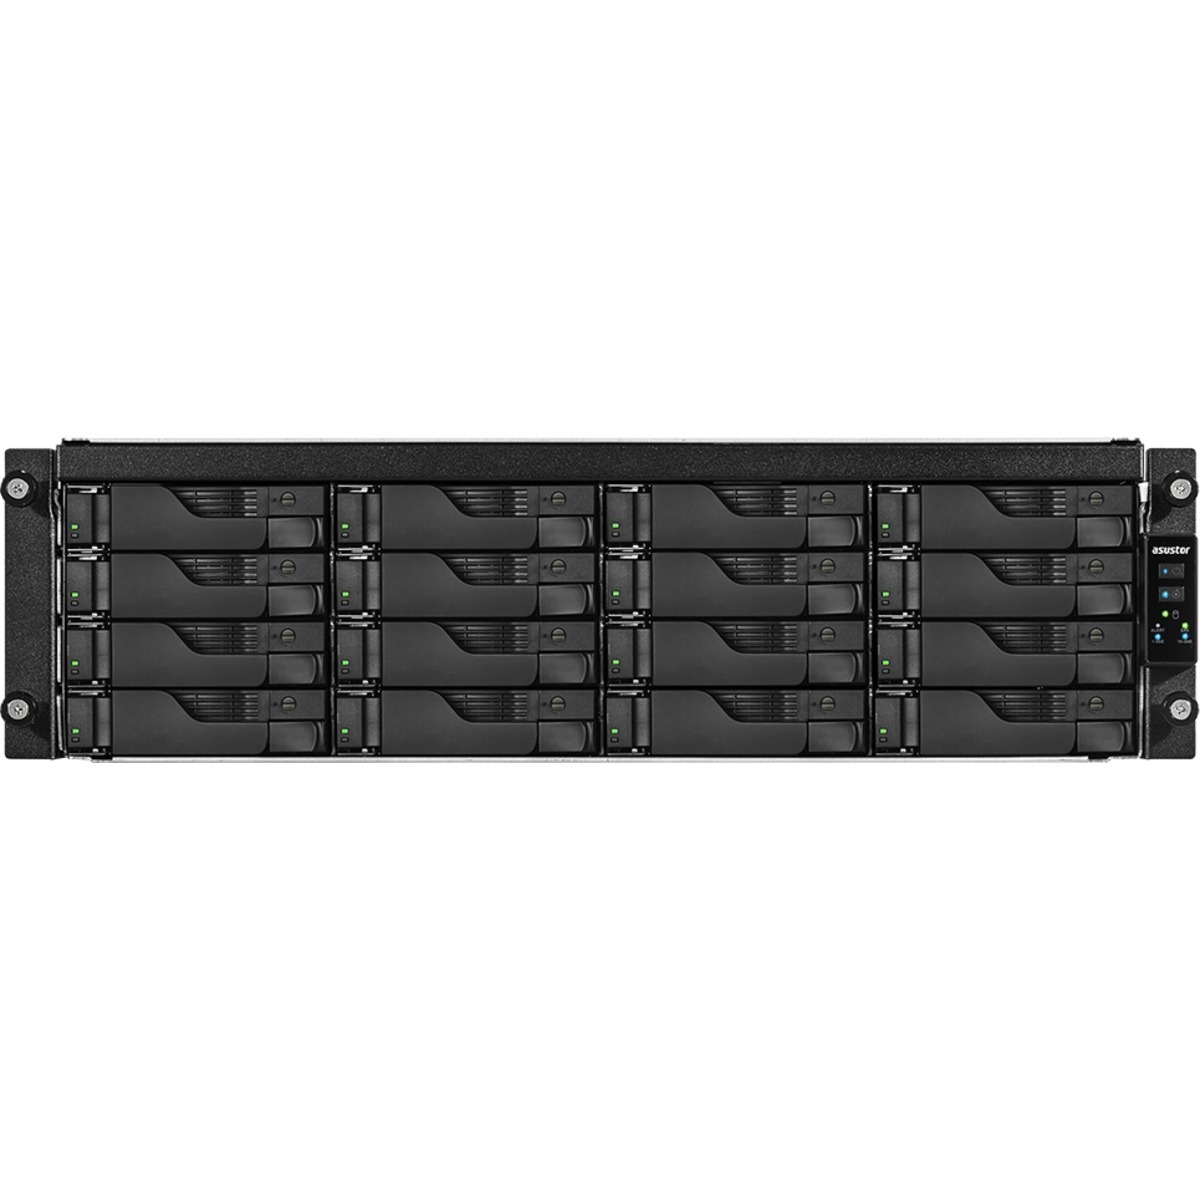 ASUSTOR AS7116RDX Lockerstor 16R Pro RackMount 16-Bay Large Business / Enterprise NAS - Network Attached Storage Device Burn-In Tested Configurations AS7116RDX Lockerstor 16R Pro